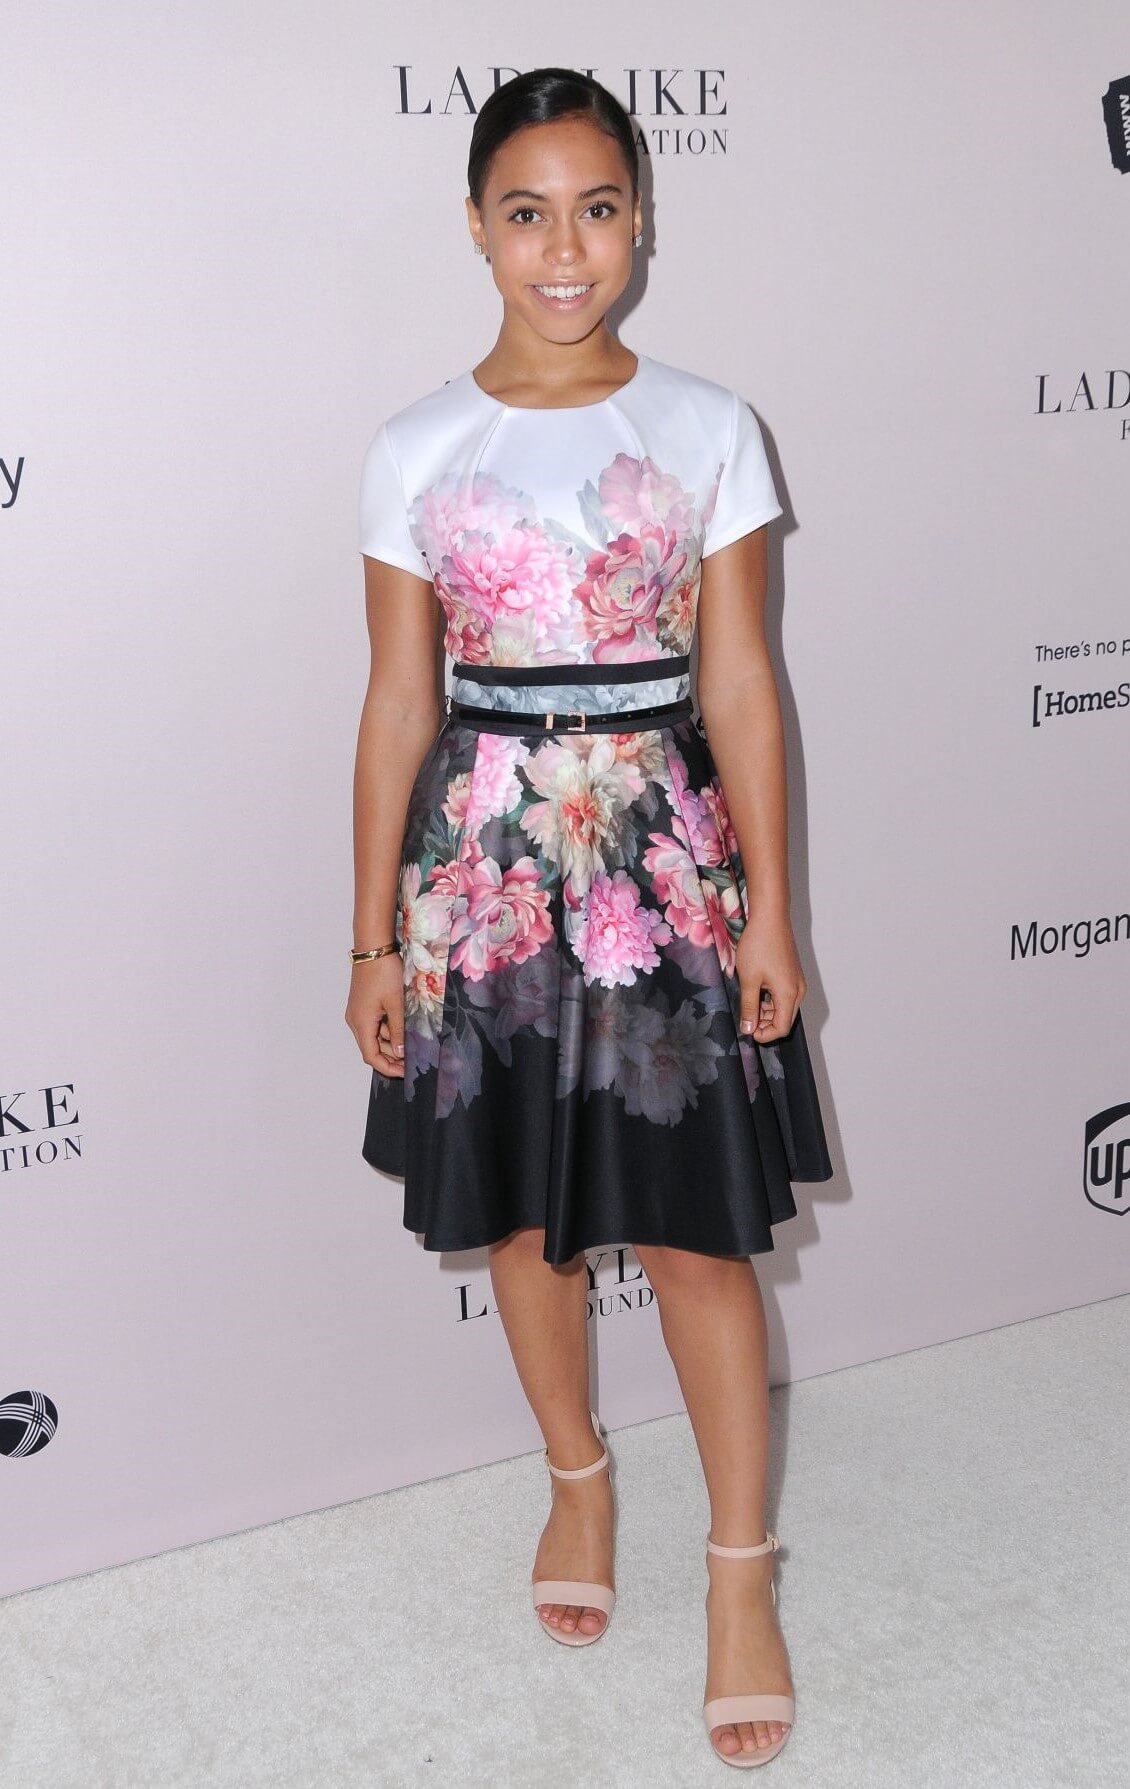 Asia Monet Ray In White Floral Print Design Half Sleeves Short Frock At Ladylike Foundation Women of Excellence Awards in LA